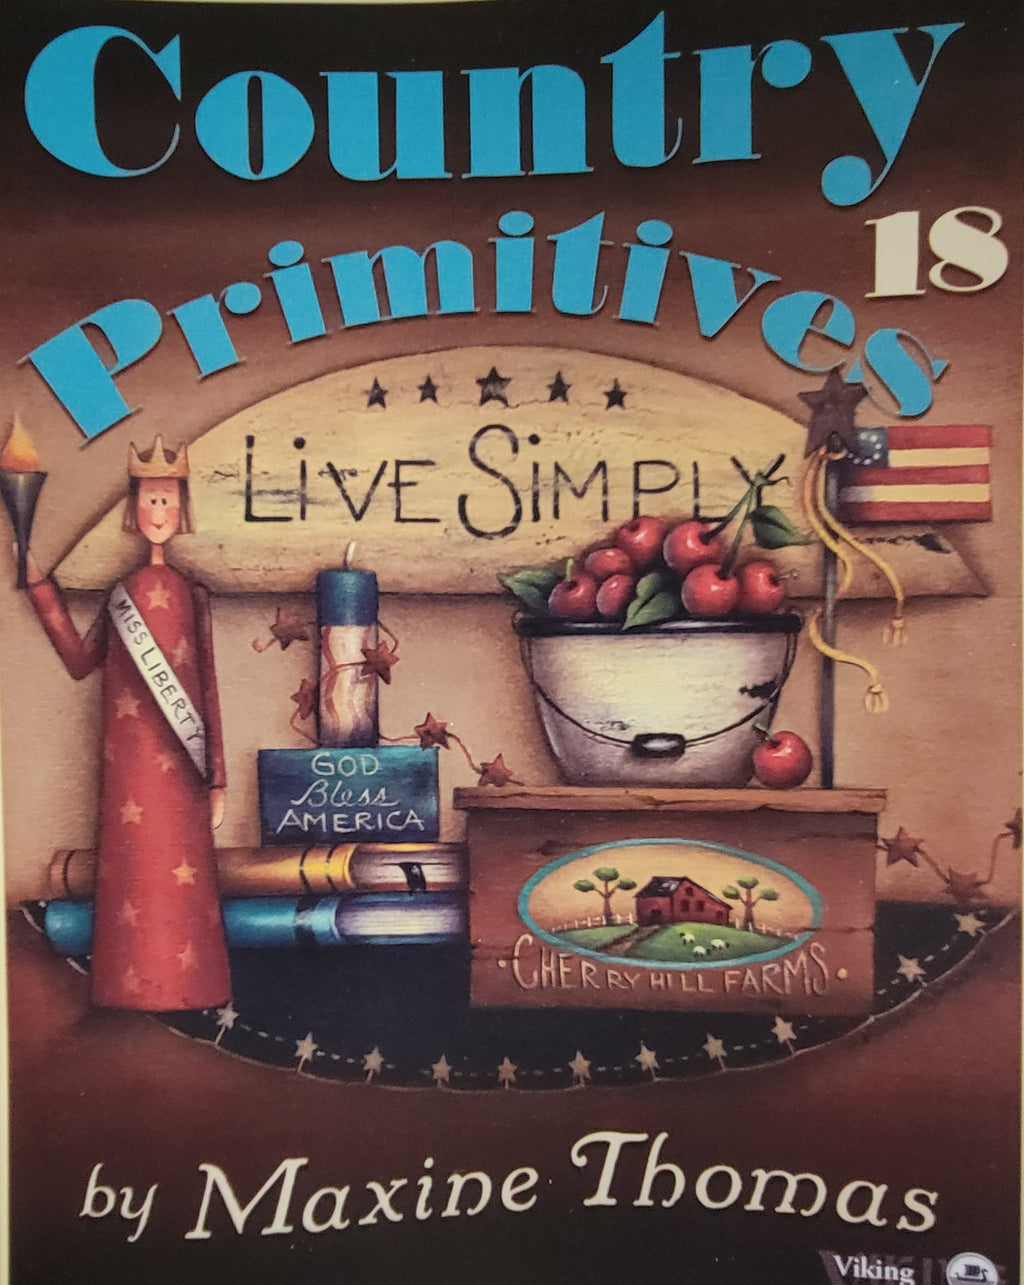 Country Primitives 18 by Maxine Thomas